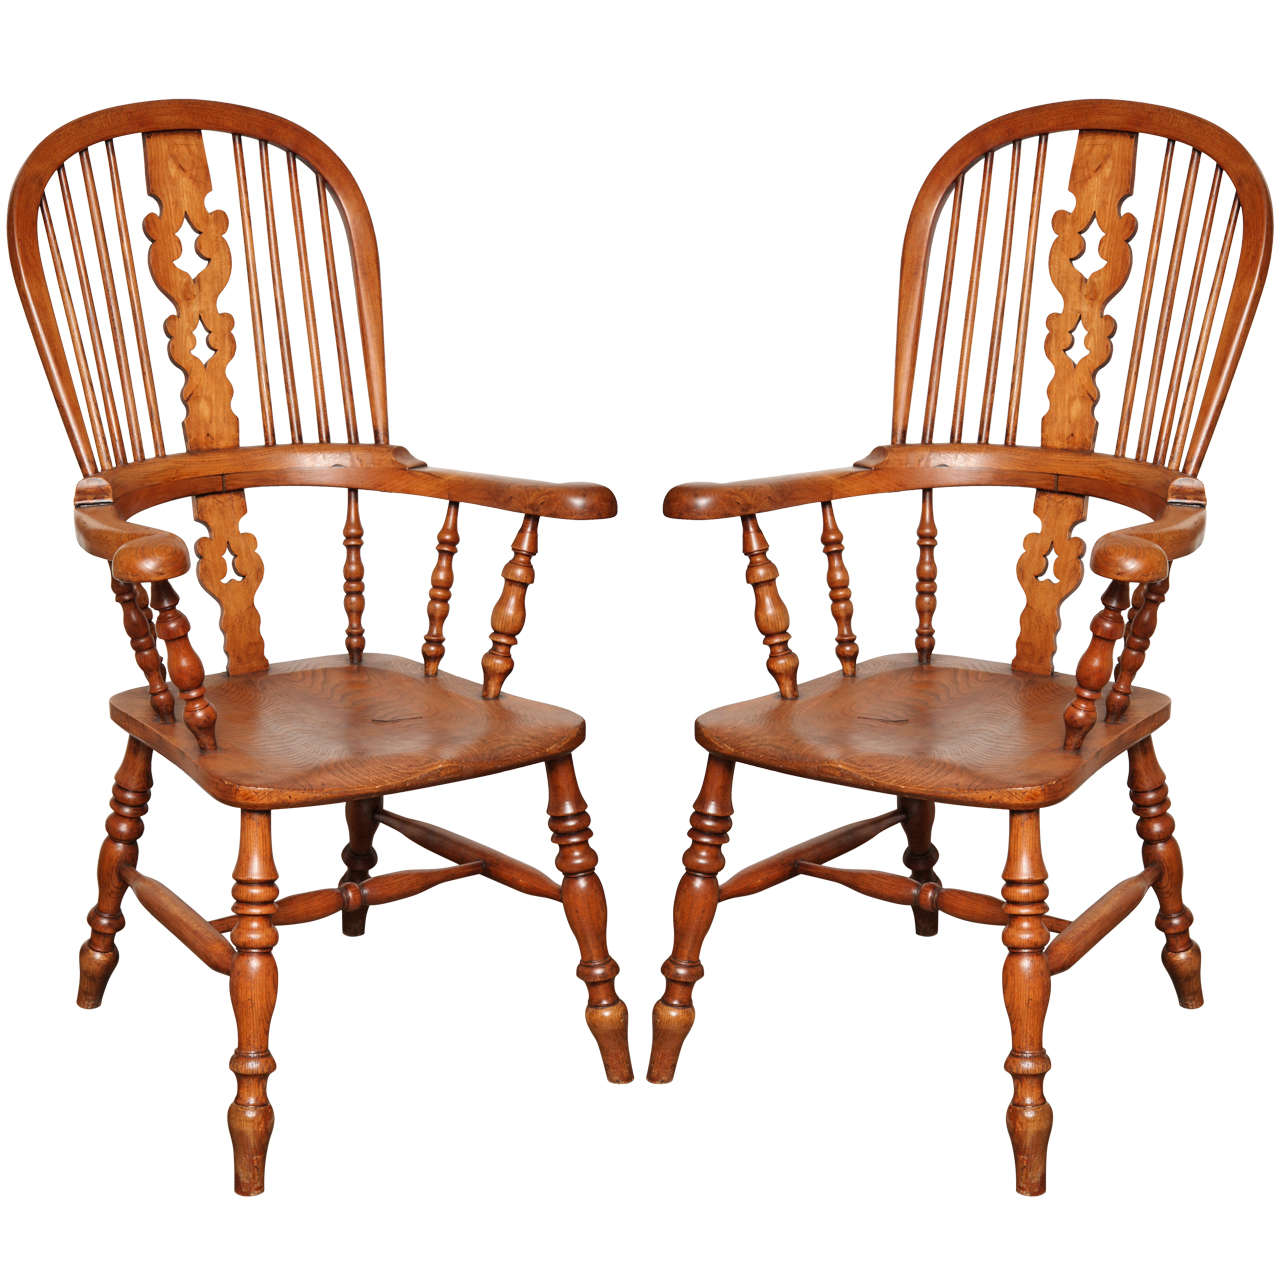 Pair of 19th Century Windsor Chairs